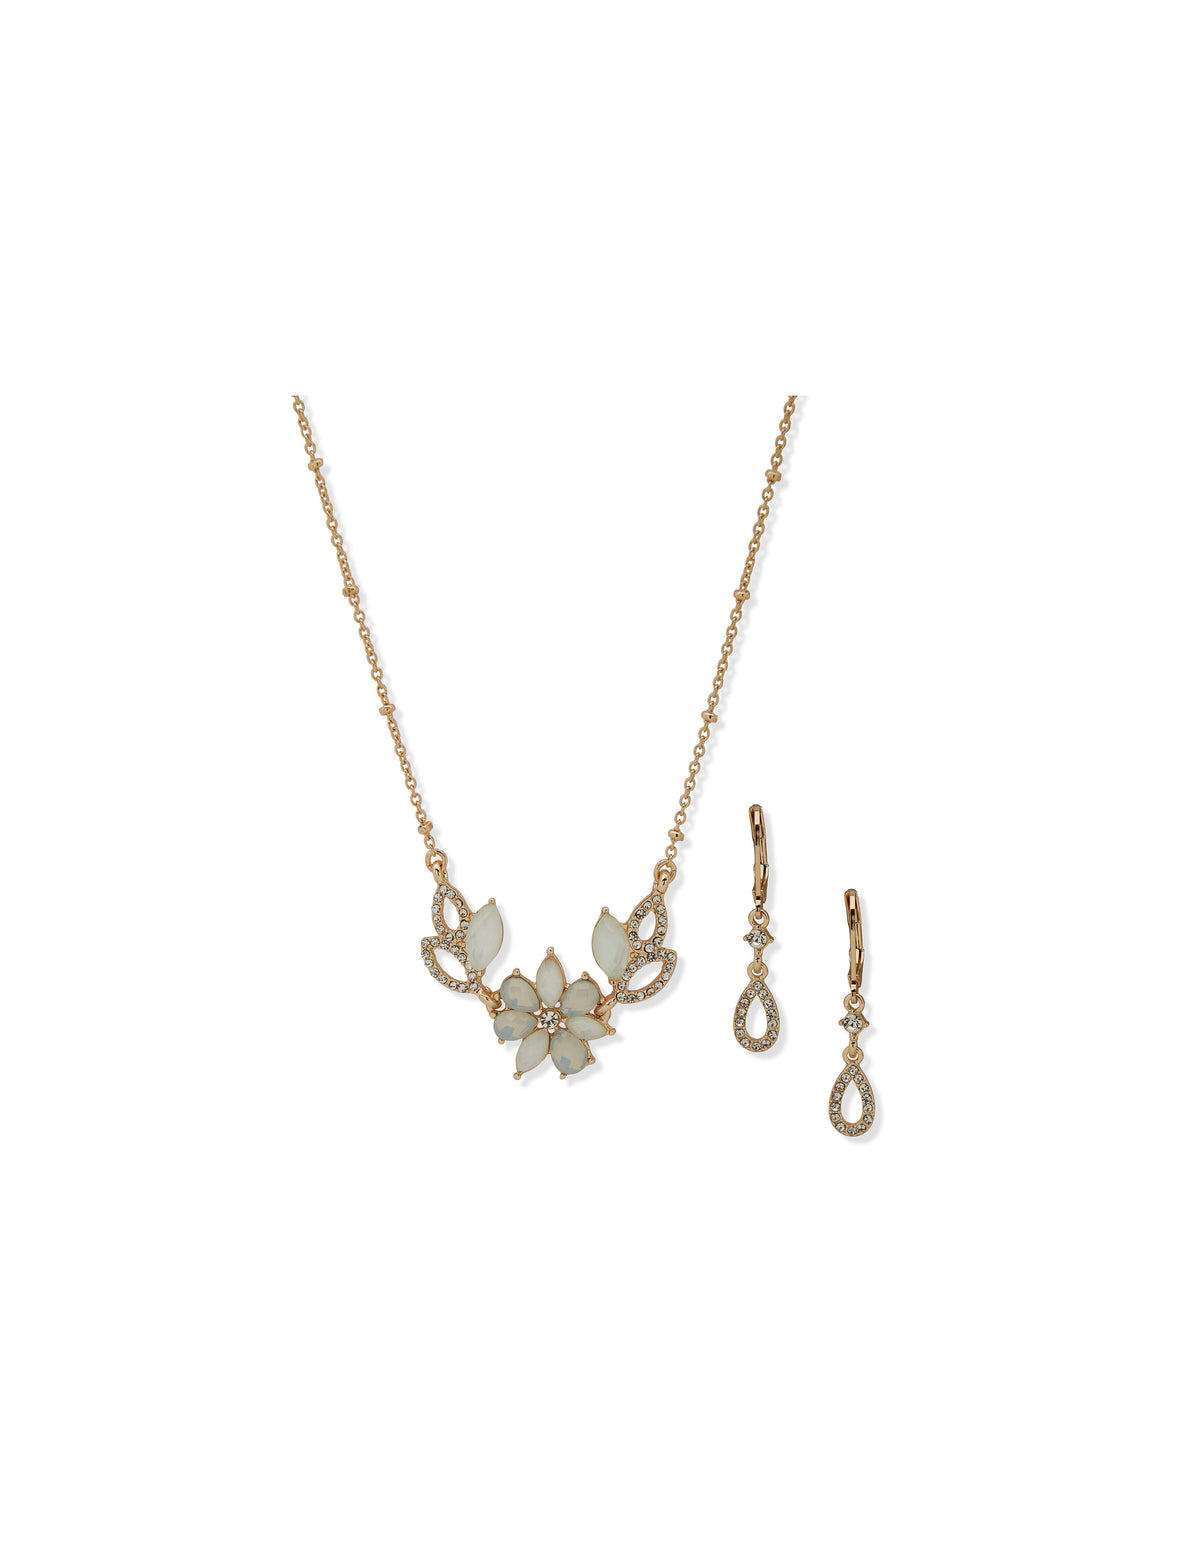 Anne Klein Gold Tone Flower Necklace and Earring Set